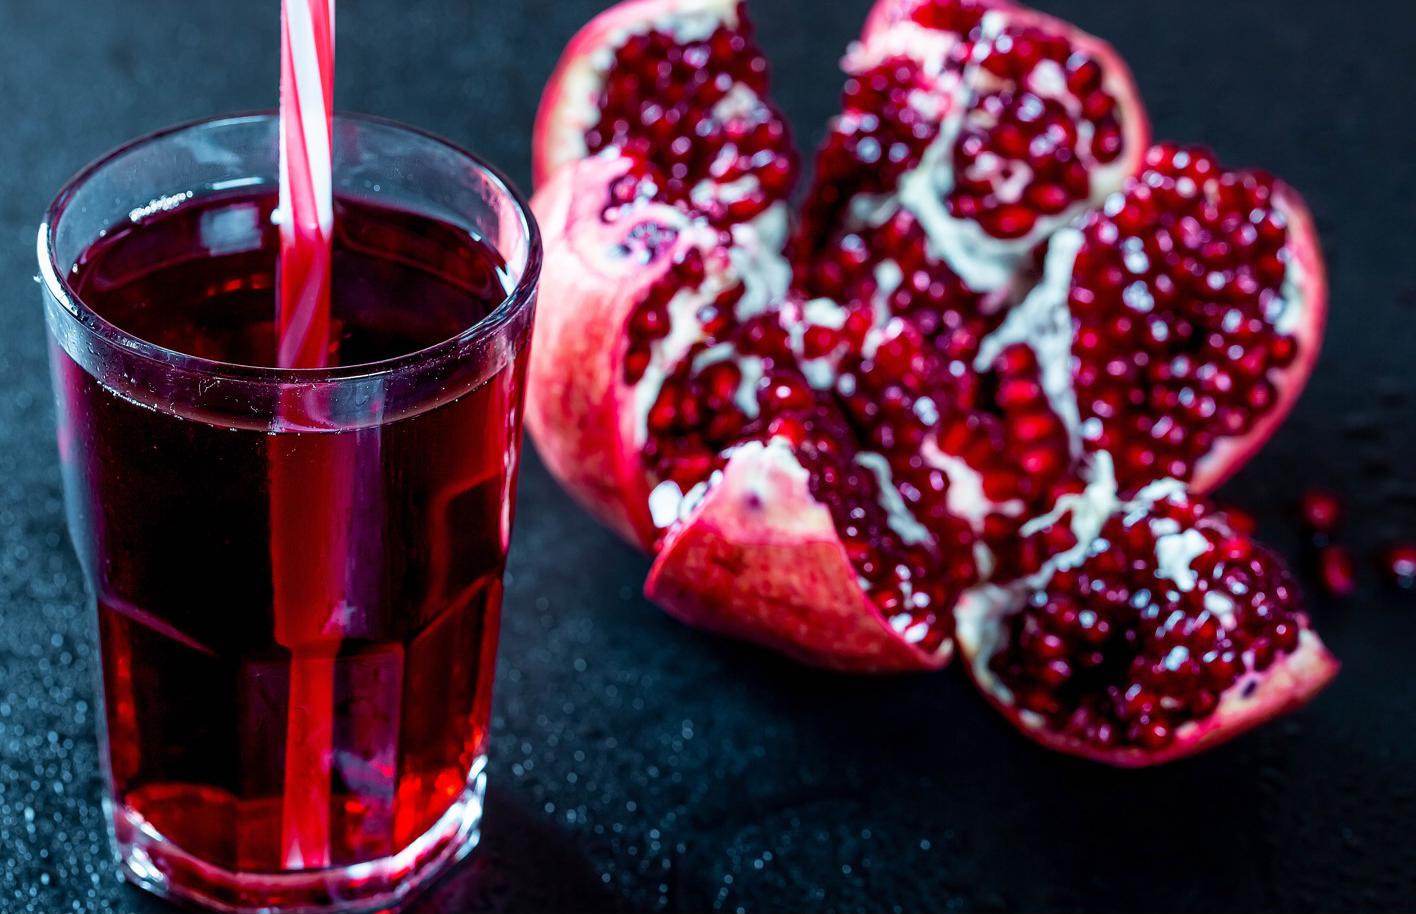 Pomegranate juice: 5 beneficial properties and tips on how to choose natural one